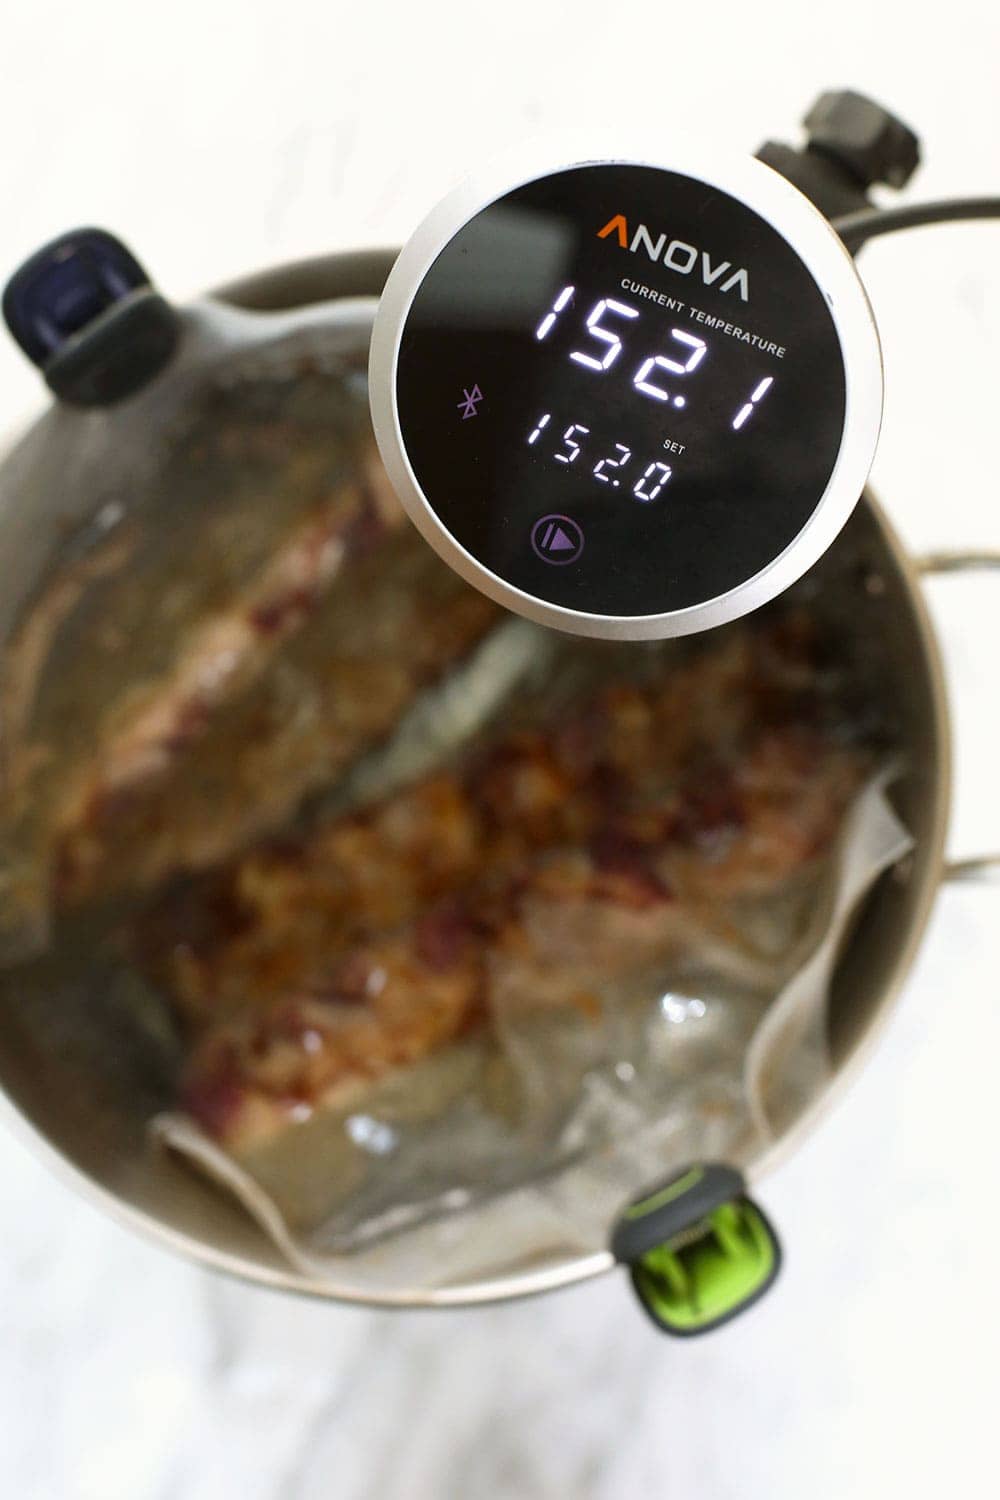 Ribs in a sous vide at 152.1ºF